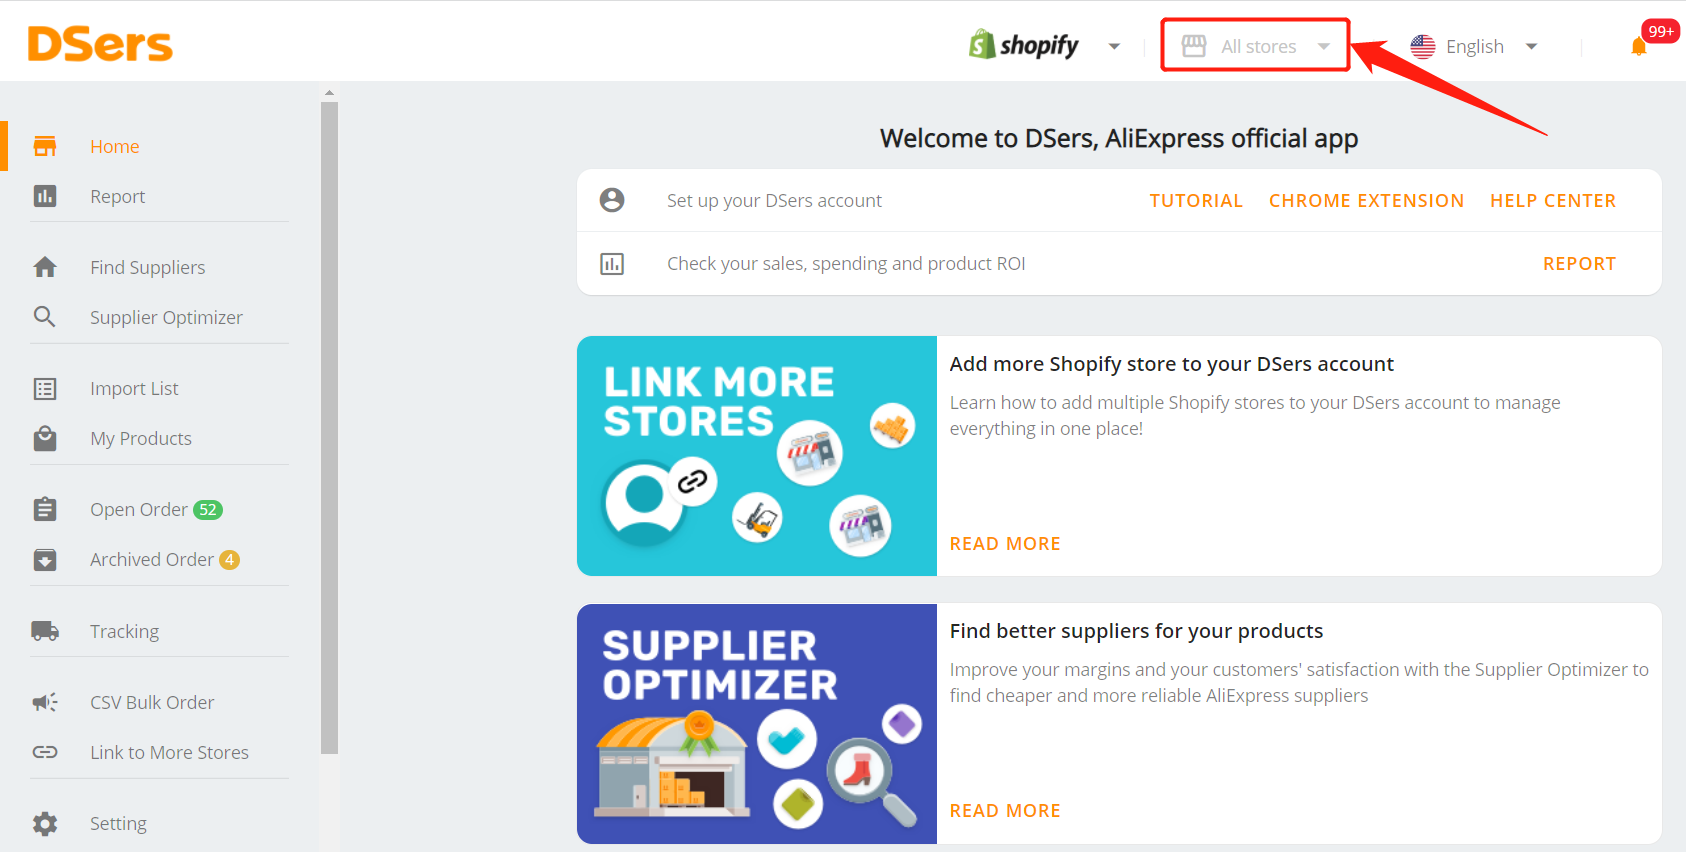 Why I see "All Stores", but not my shop name - All Stores - Shopify DSers